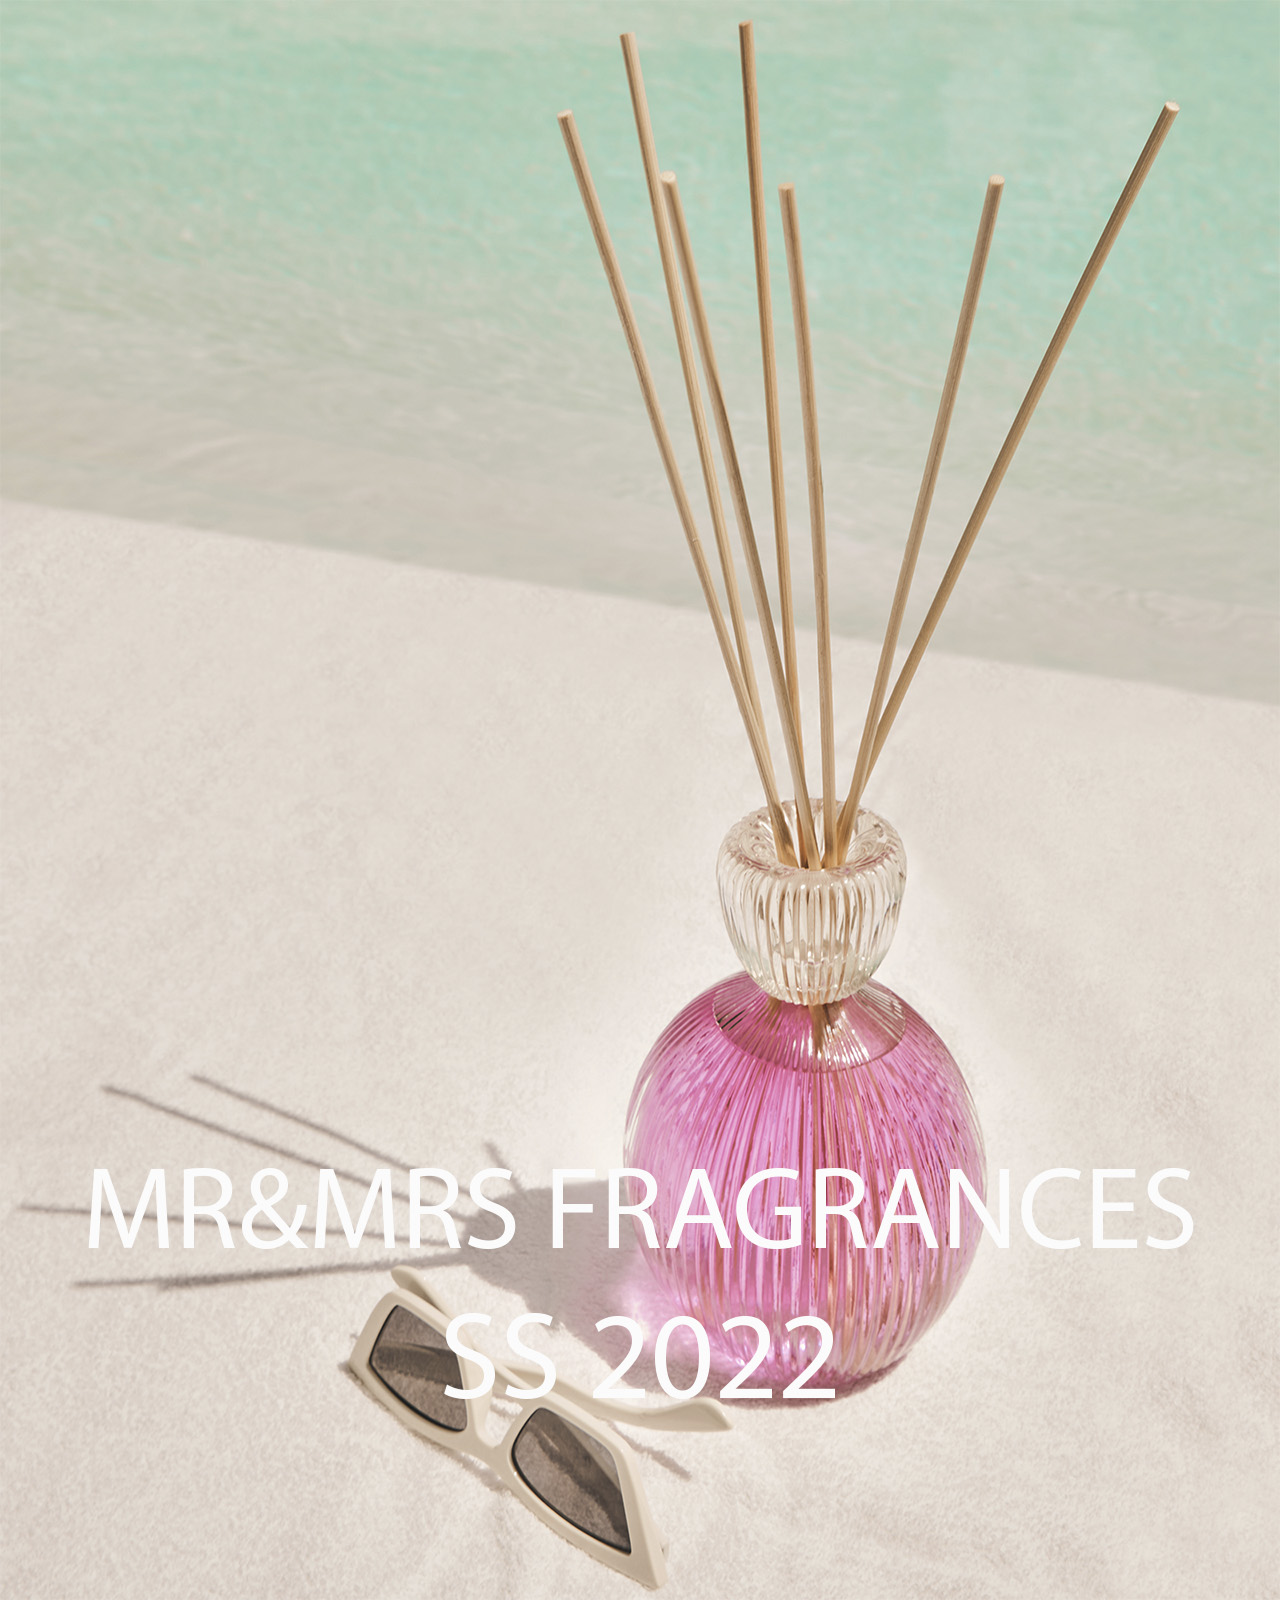 MR & MRS FRAGRANCES SS 22 by Andrea Reina